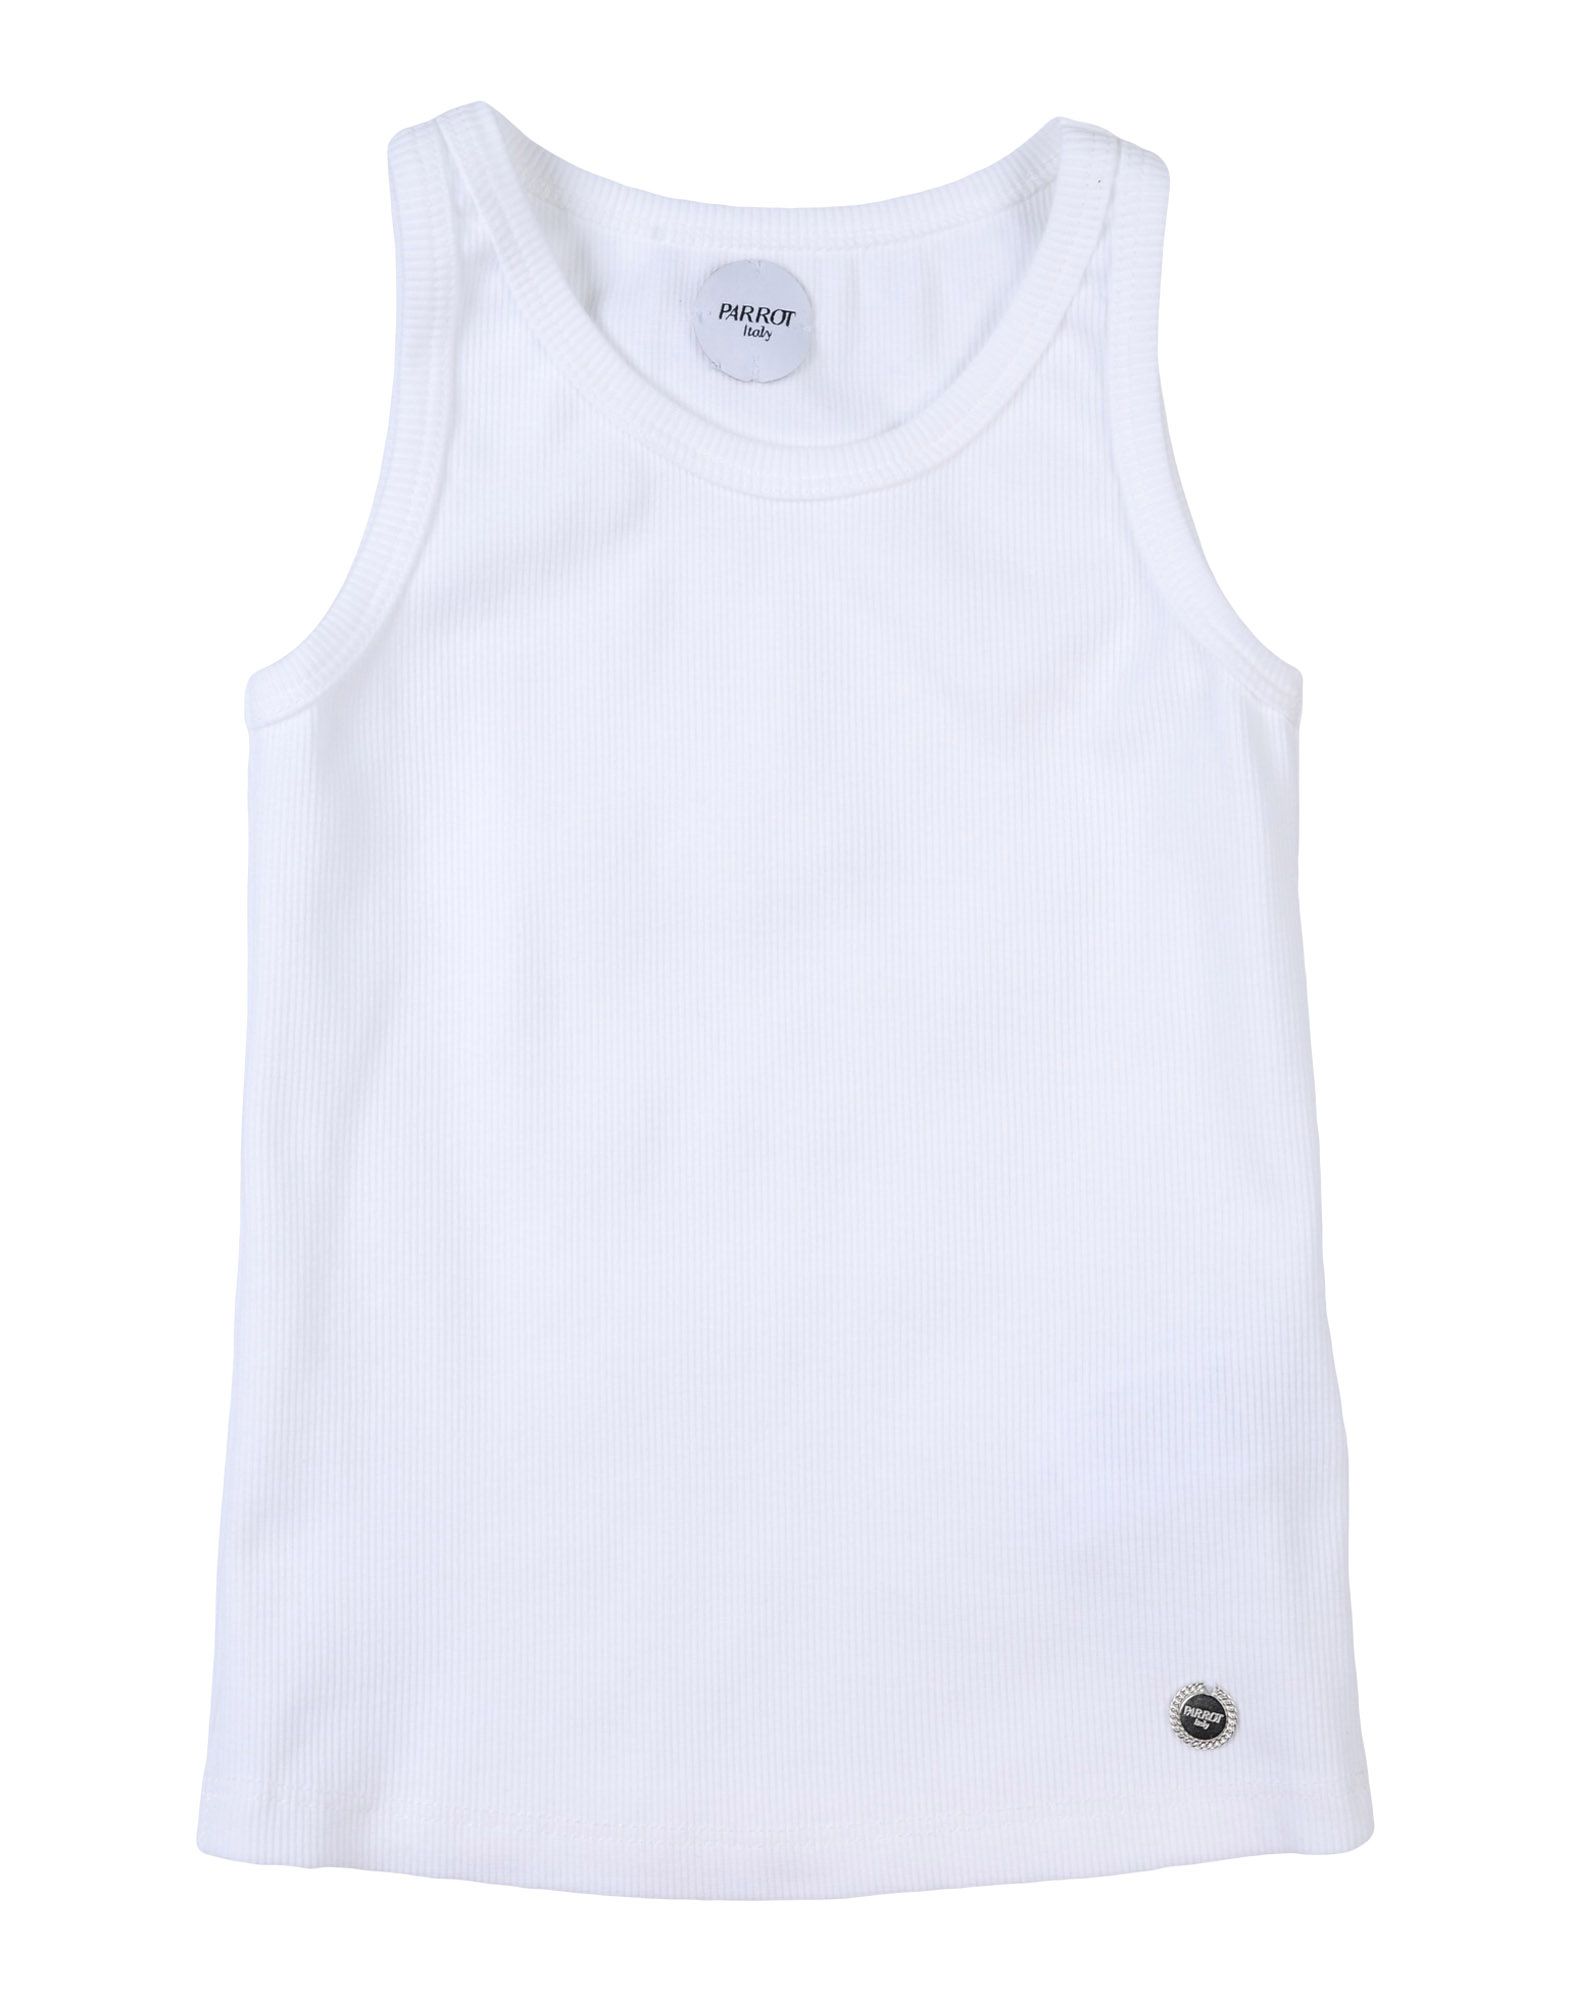 Parrot Kids' T-shirts In White